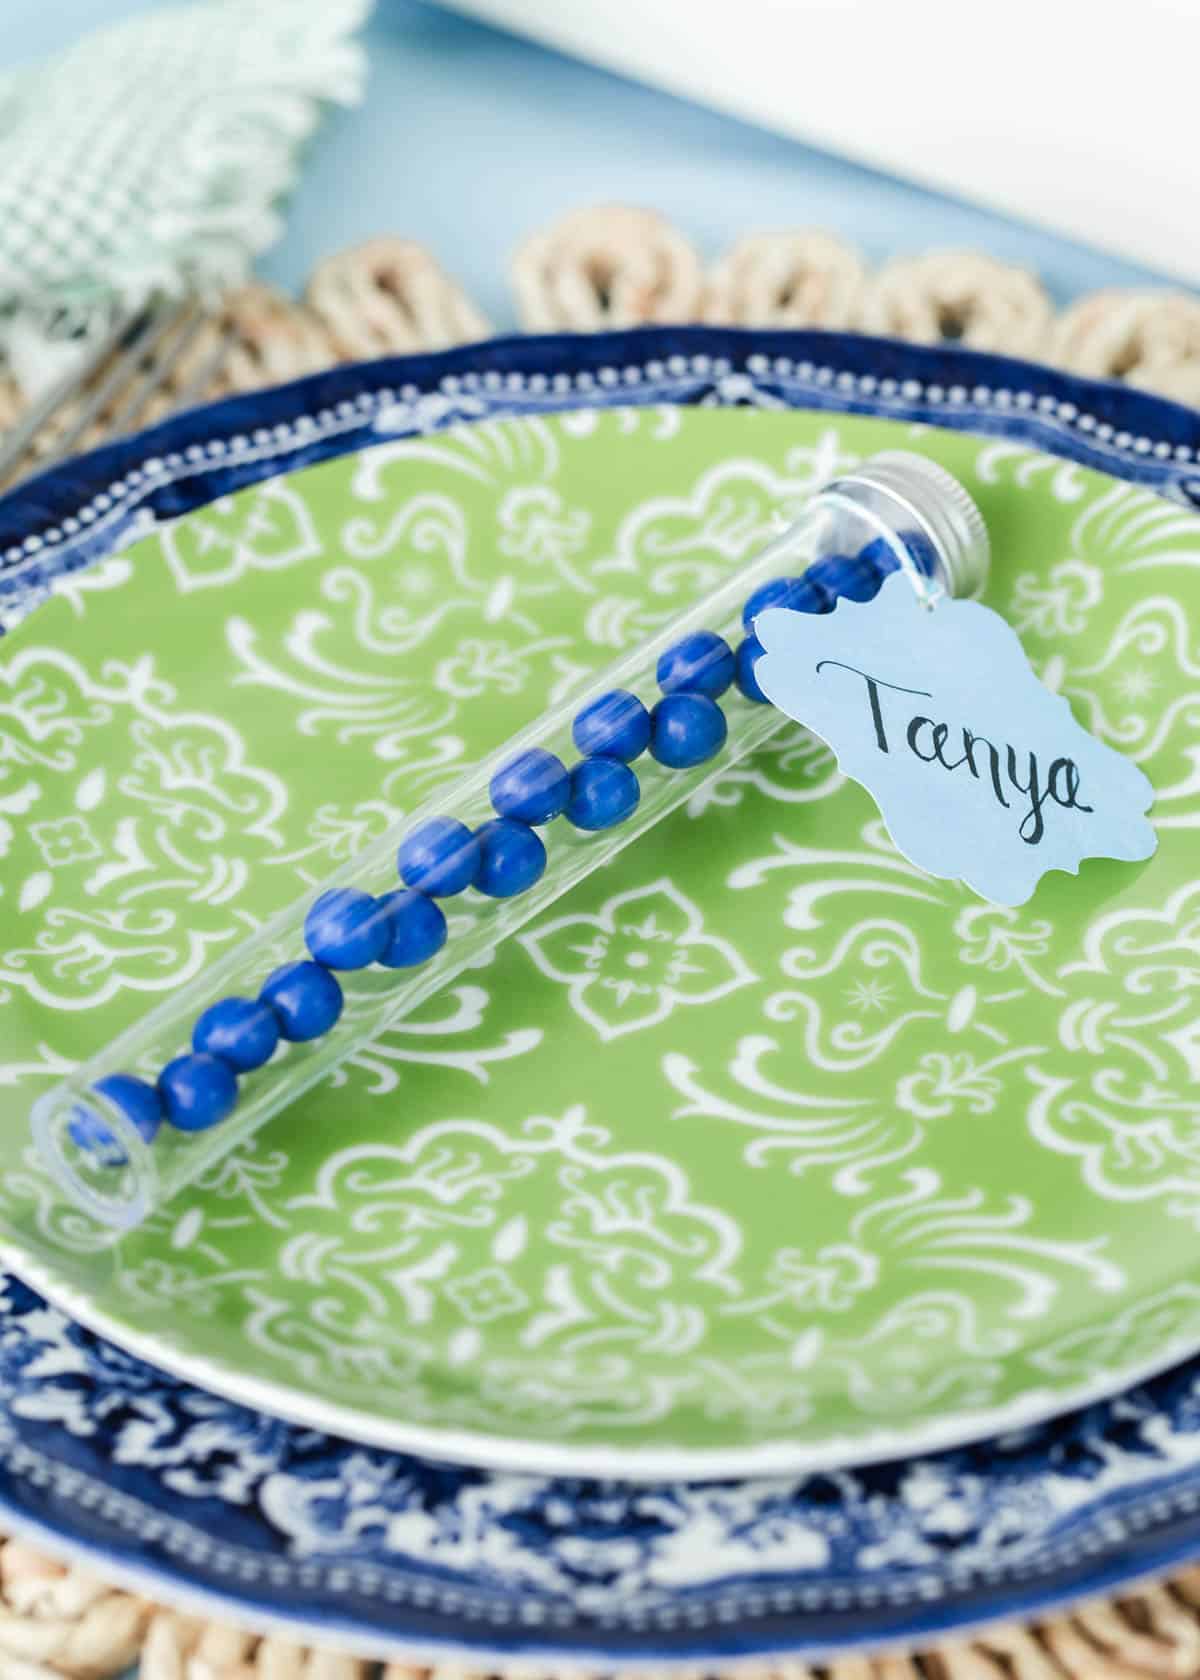 blue candies in clear tube with name tag tied on, sitting on green plate.